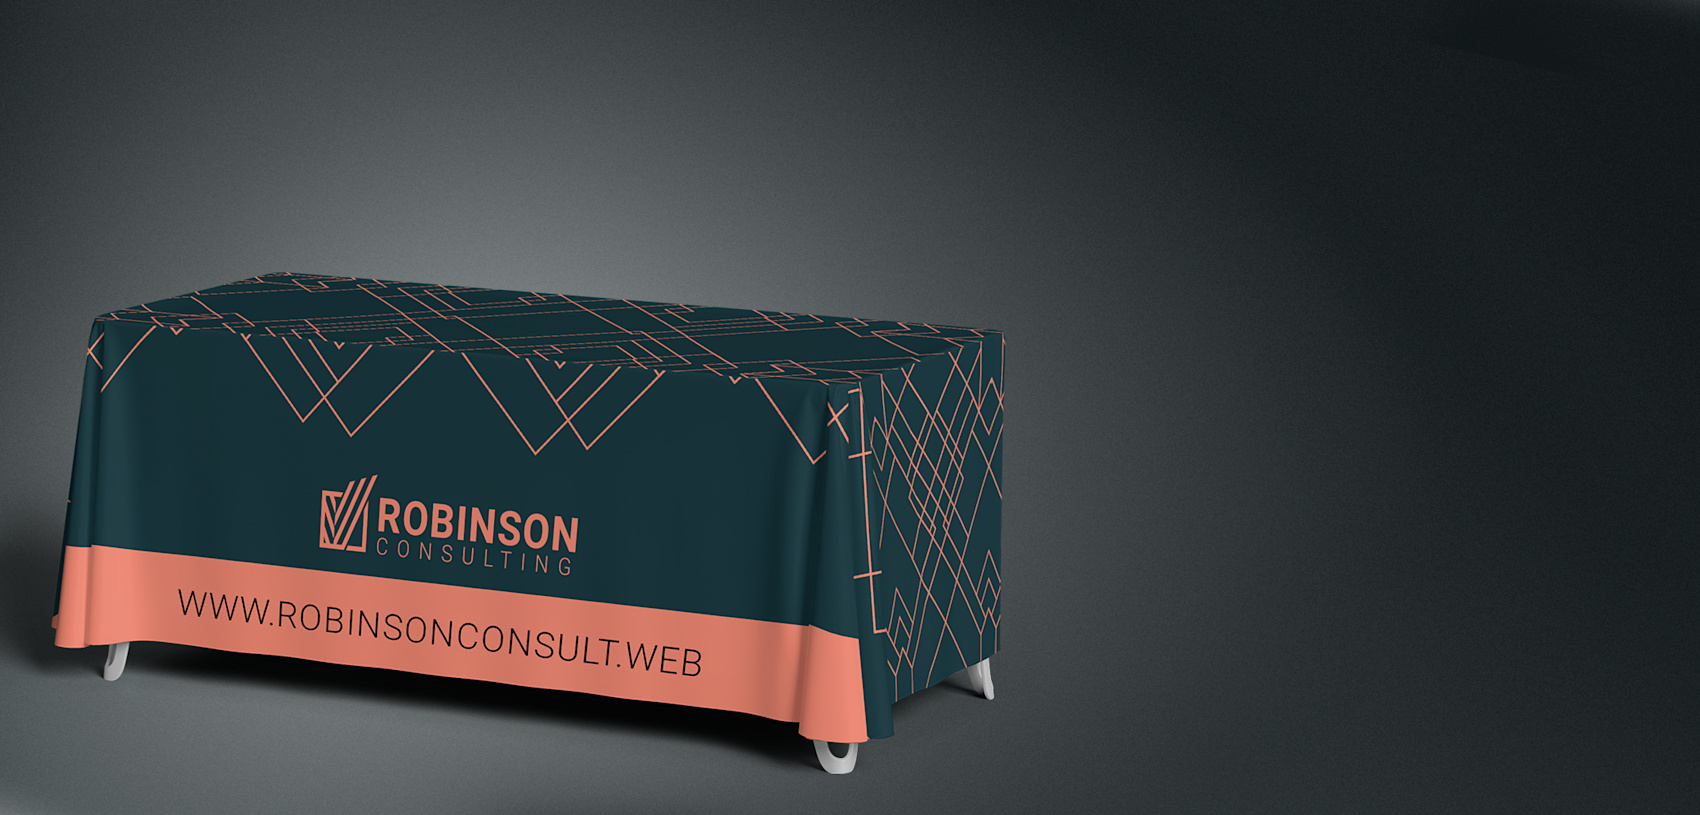 printed tablecloth with logo and contact info